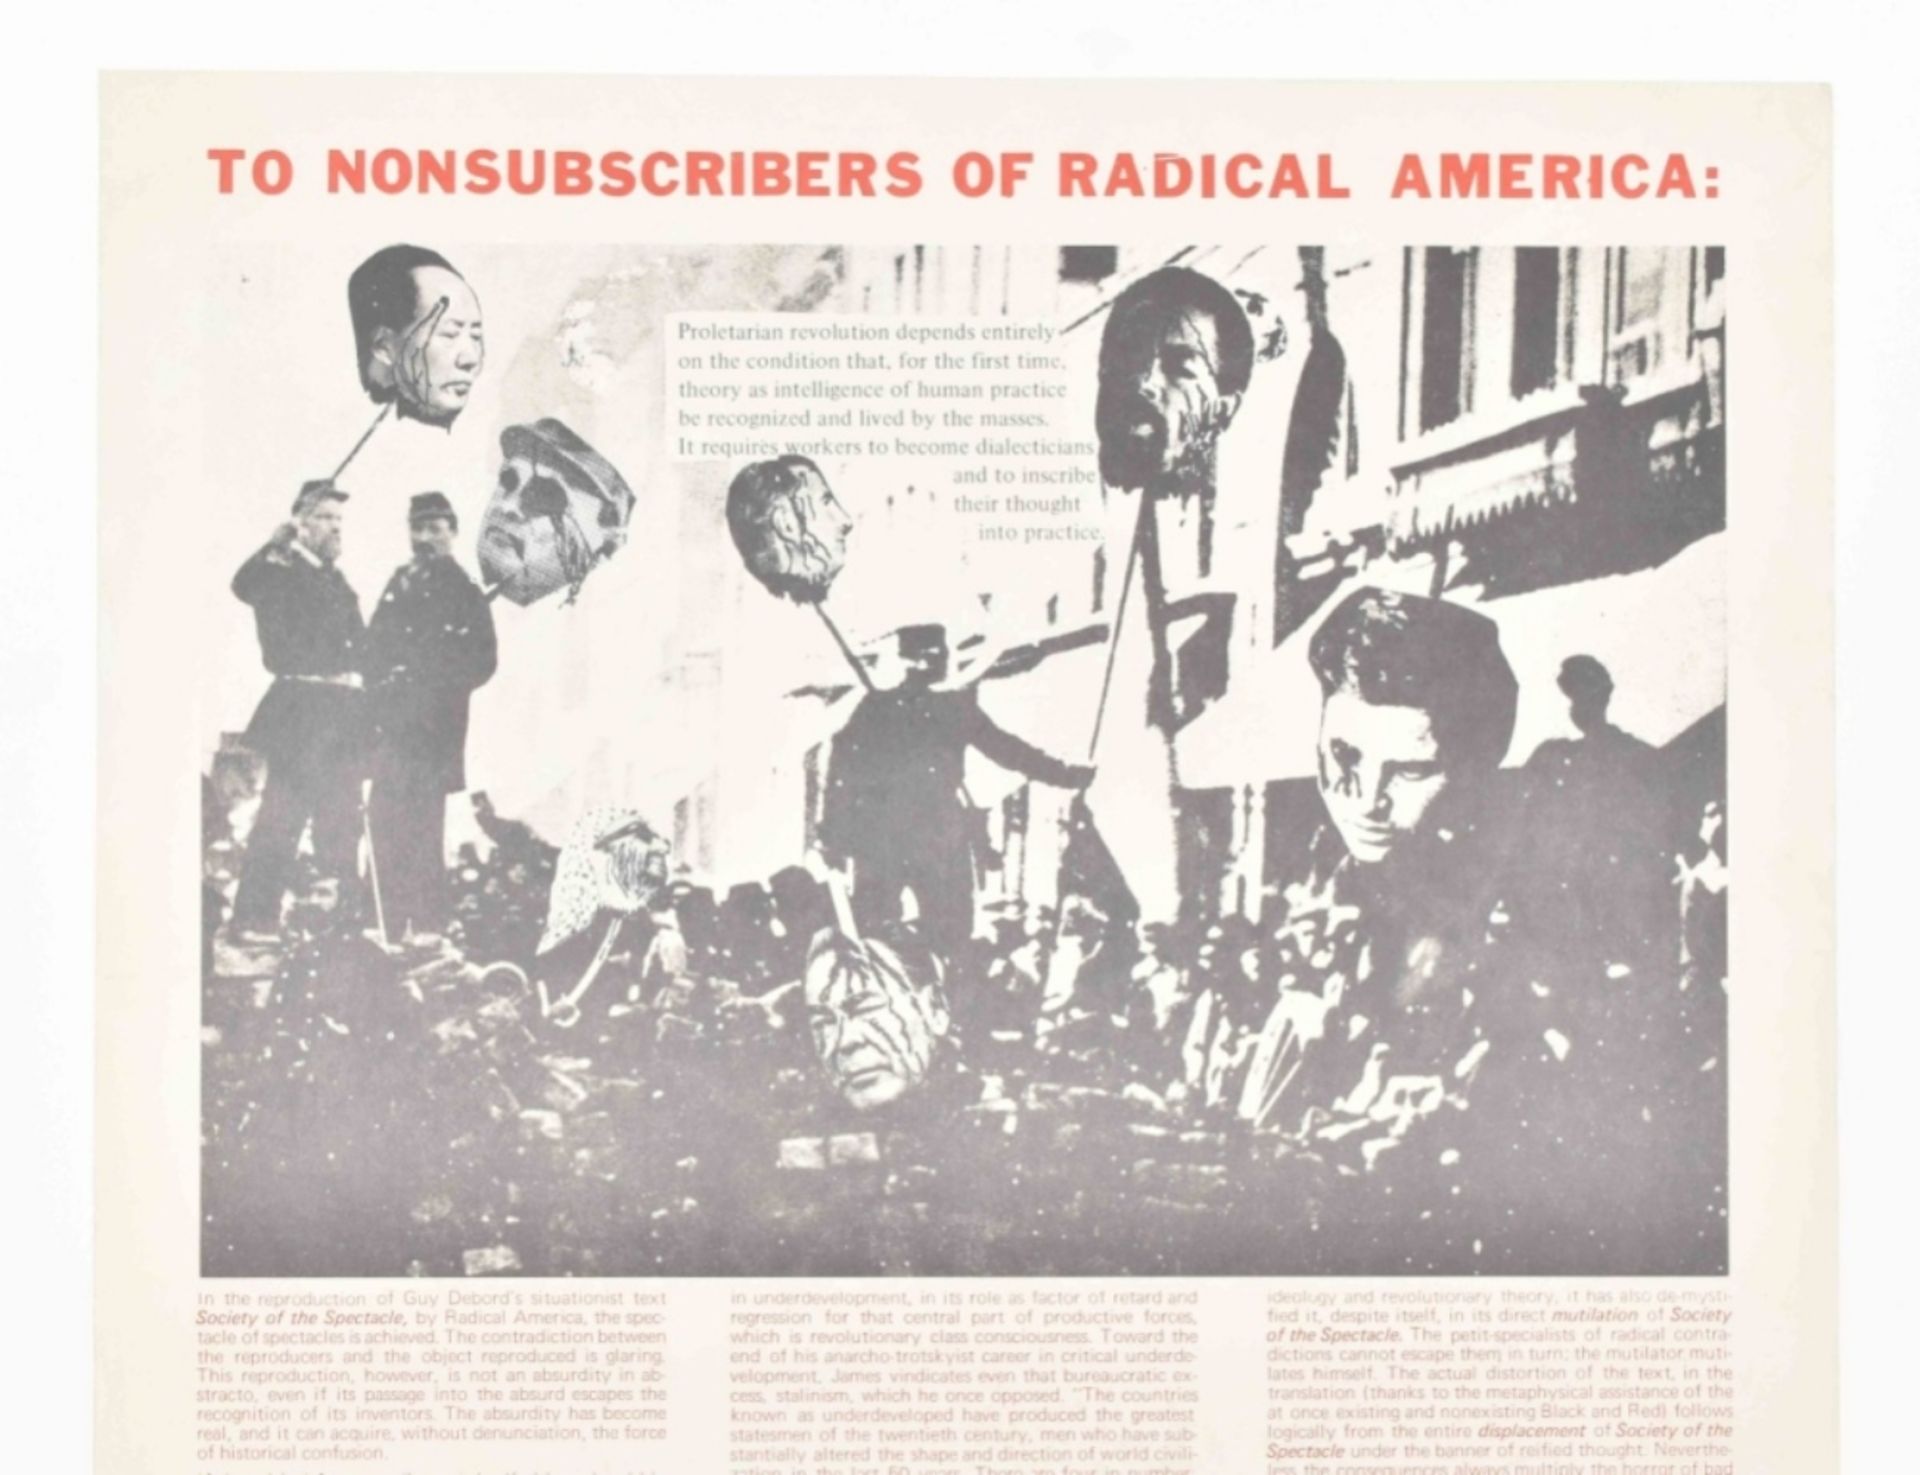 [Situationists] To Nonsubscribers of radical America - Image 3 of 4